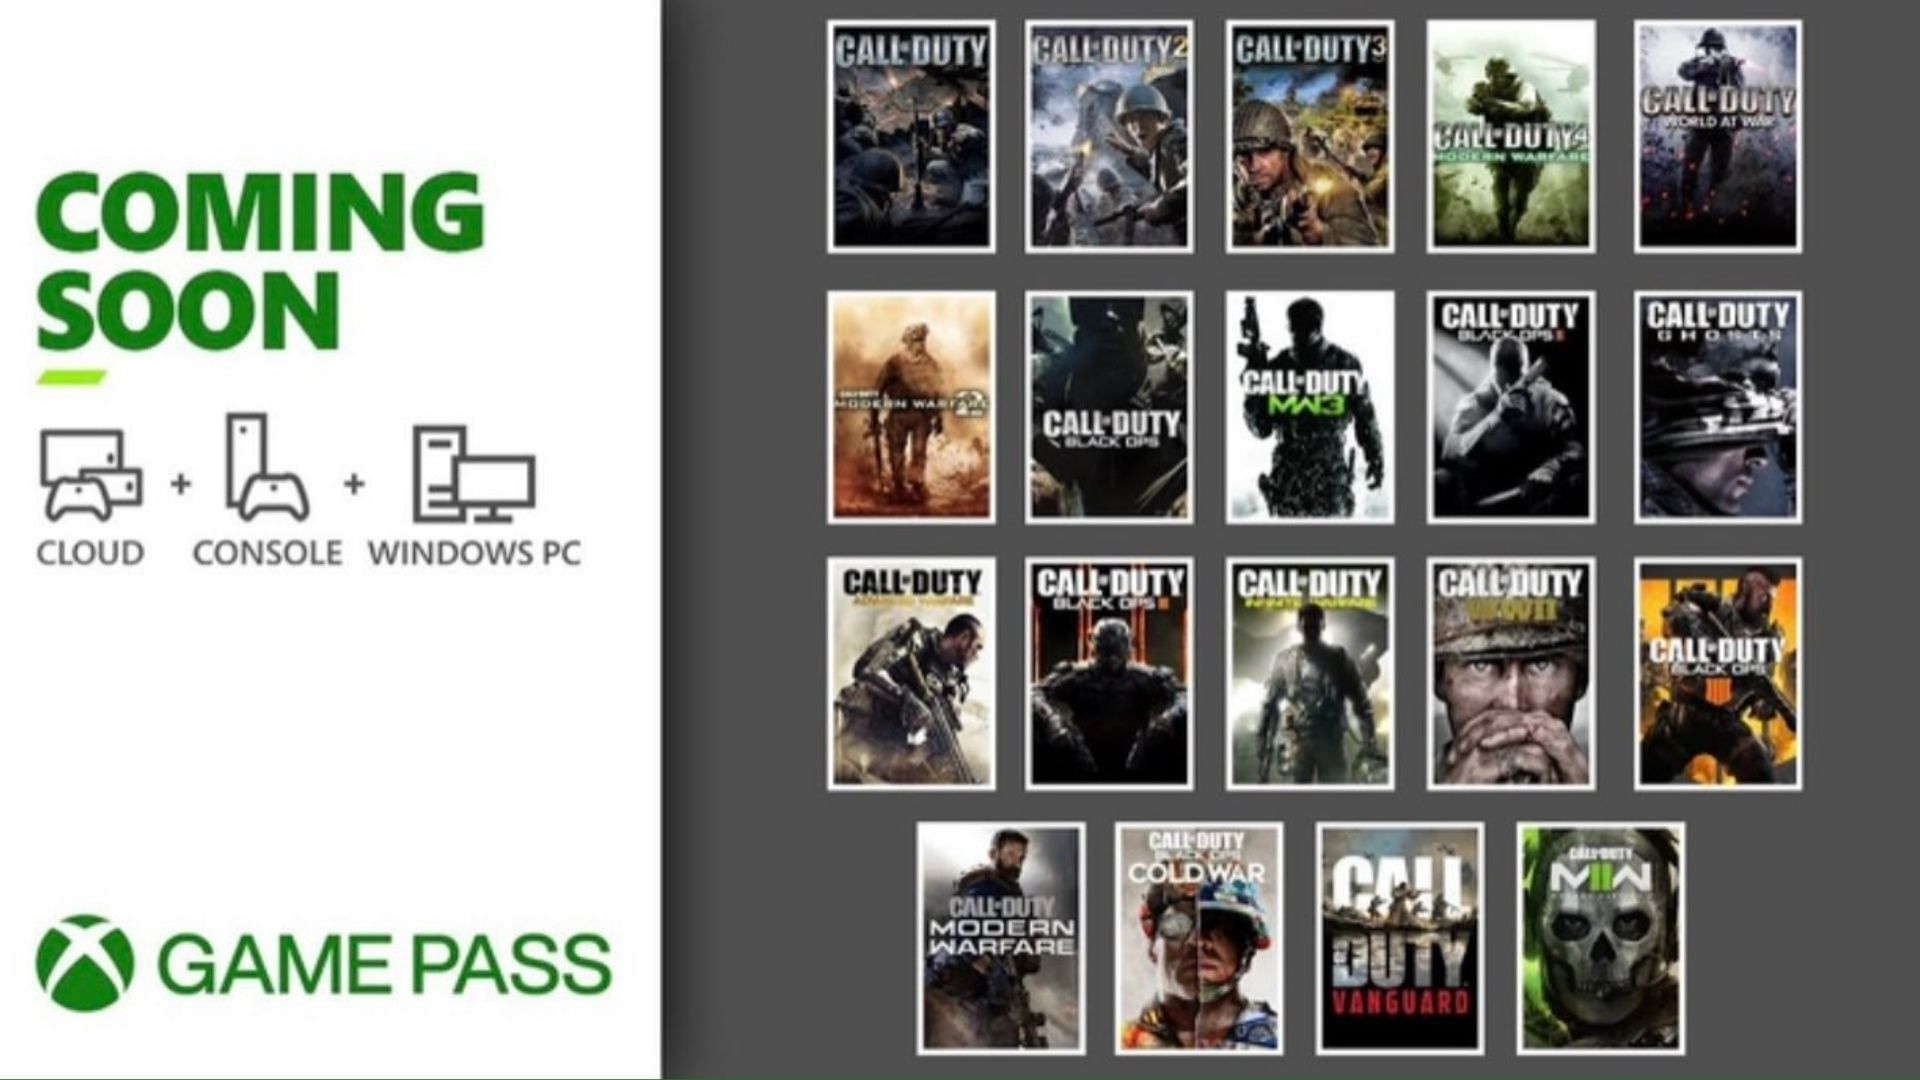 All COD games in Xbox Game Pass (Image via Microsoft and Activision Blizzard)